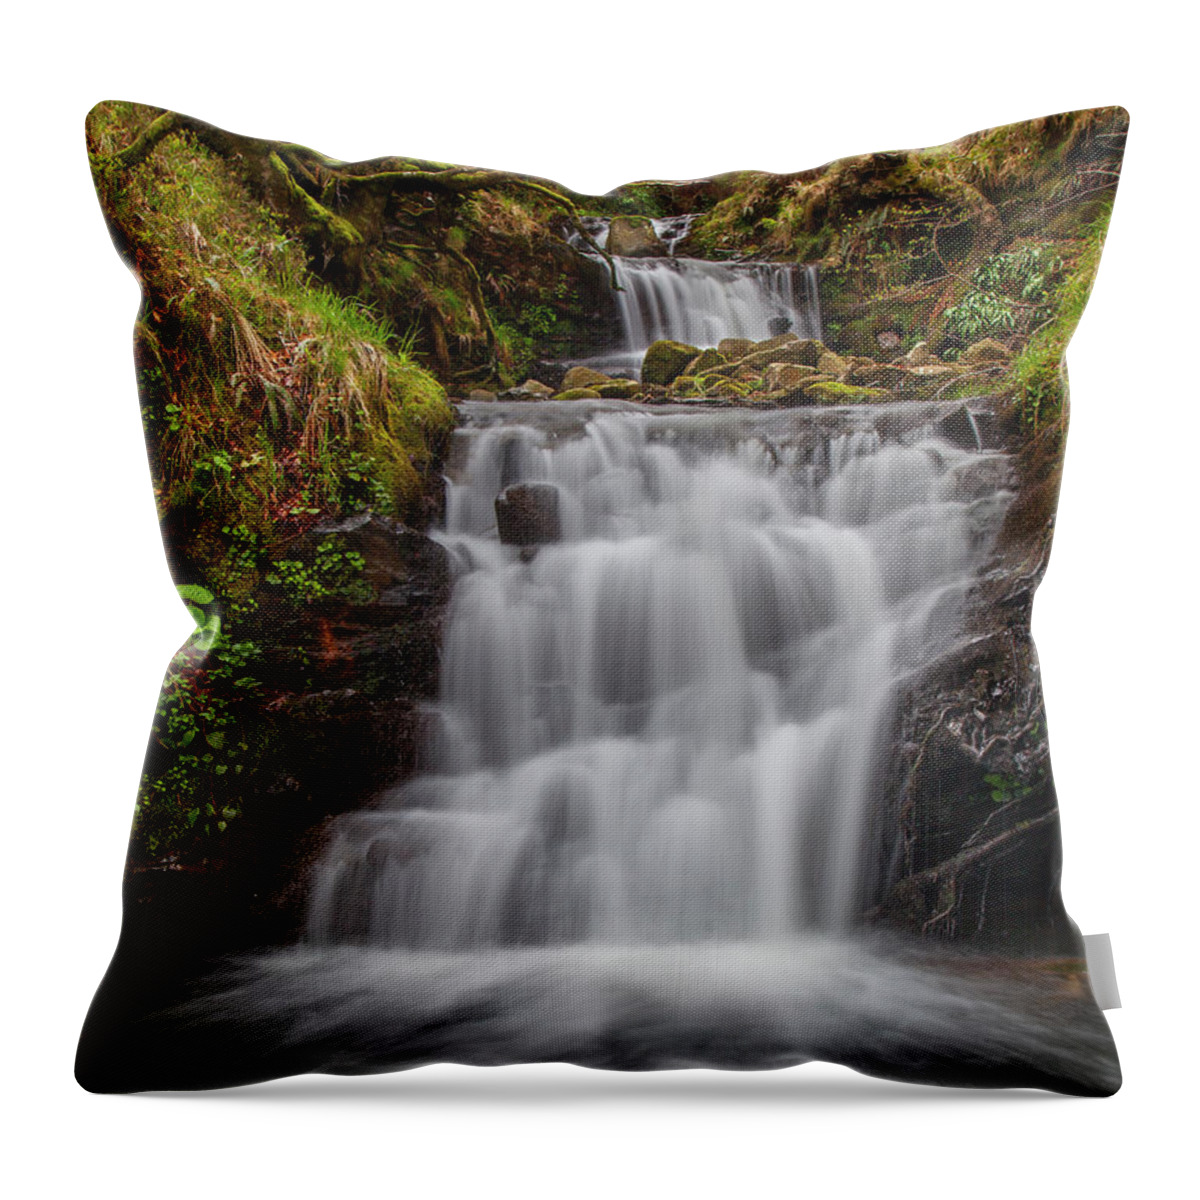 Scenics Throw Pillow featuring the photograph Gorbeia Waterfall by Martin Zalba